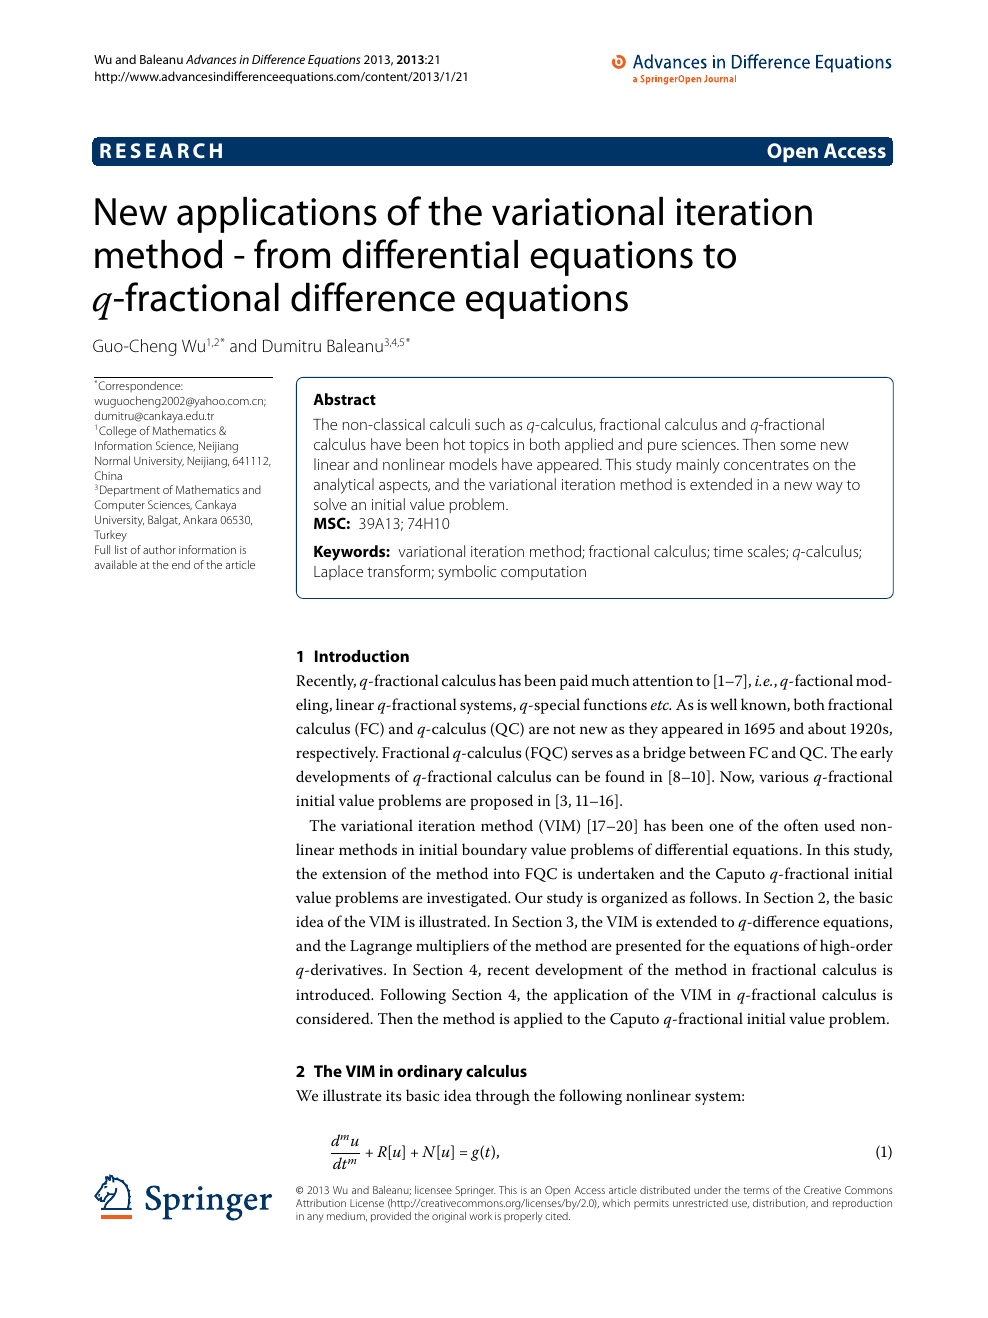 New Applications Of The Variational Iteration Method From Differential Equations To Q Fractional Difference Equations Topic Of Research Paper In Mathematics Download Scholarly Article Pdf And Read For Free On Cyberleninka